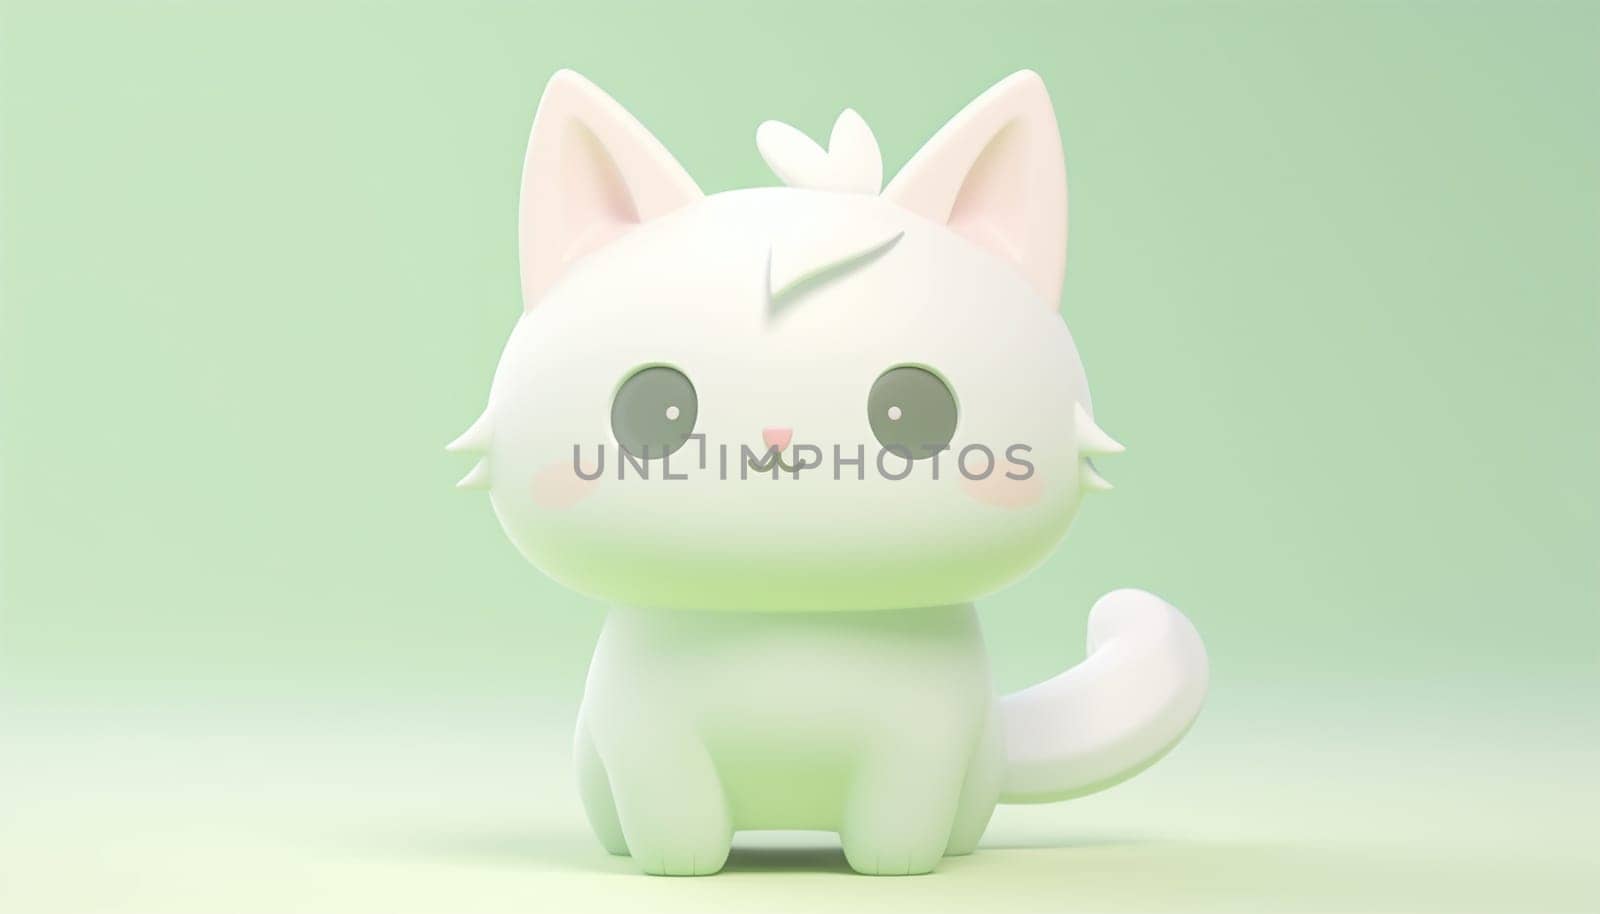 Cute little cat with a kind smiling face and big eyes. 3D Kitten in pastel color green and pink. Super cute pet illustration drawn in a cartoon 3d mesh style background Copy space Space for text